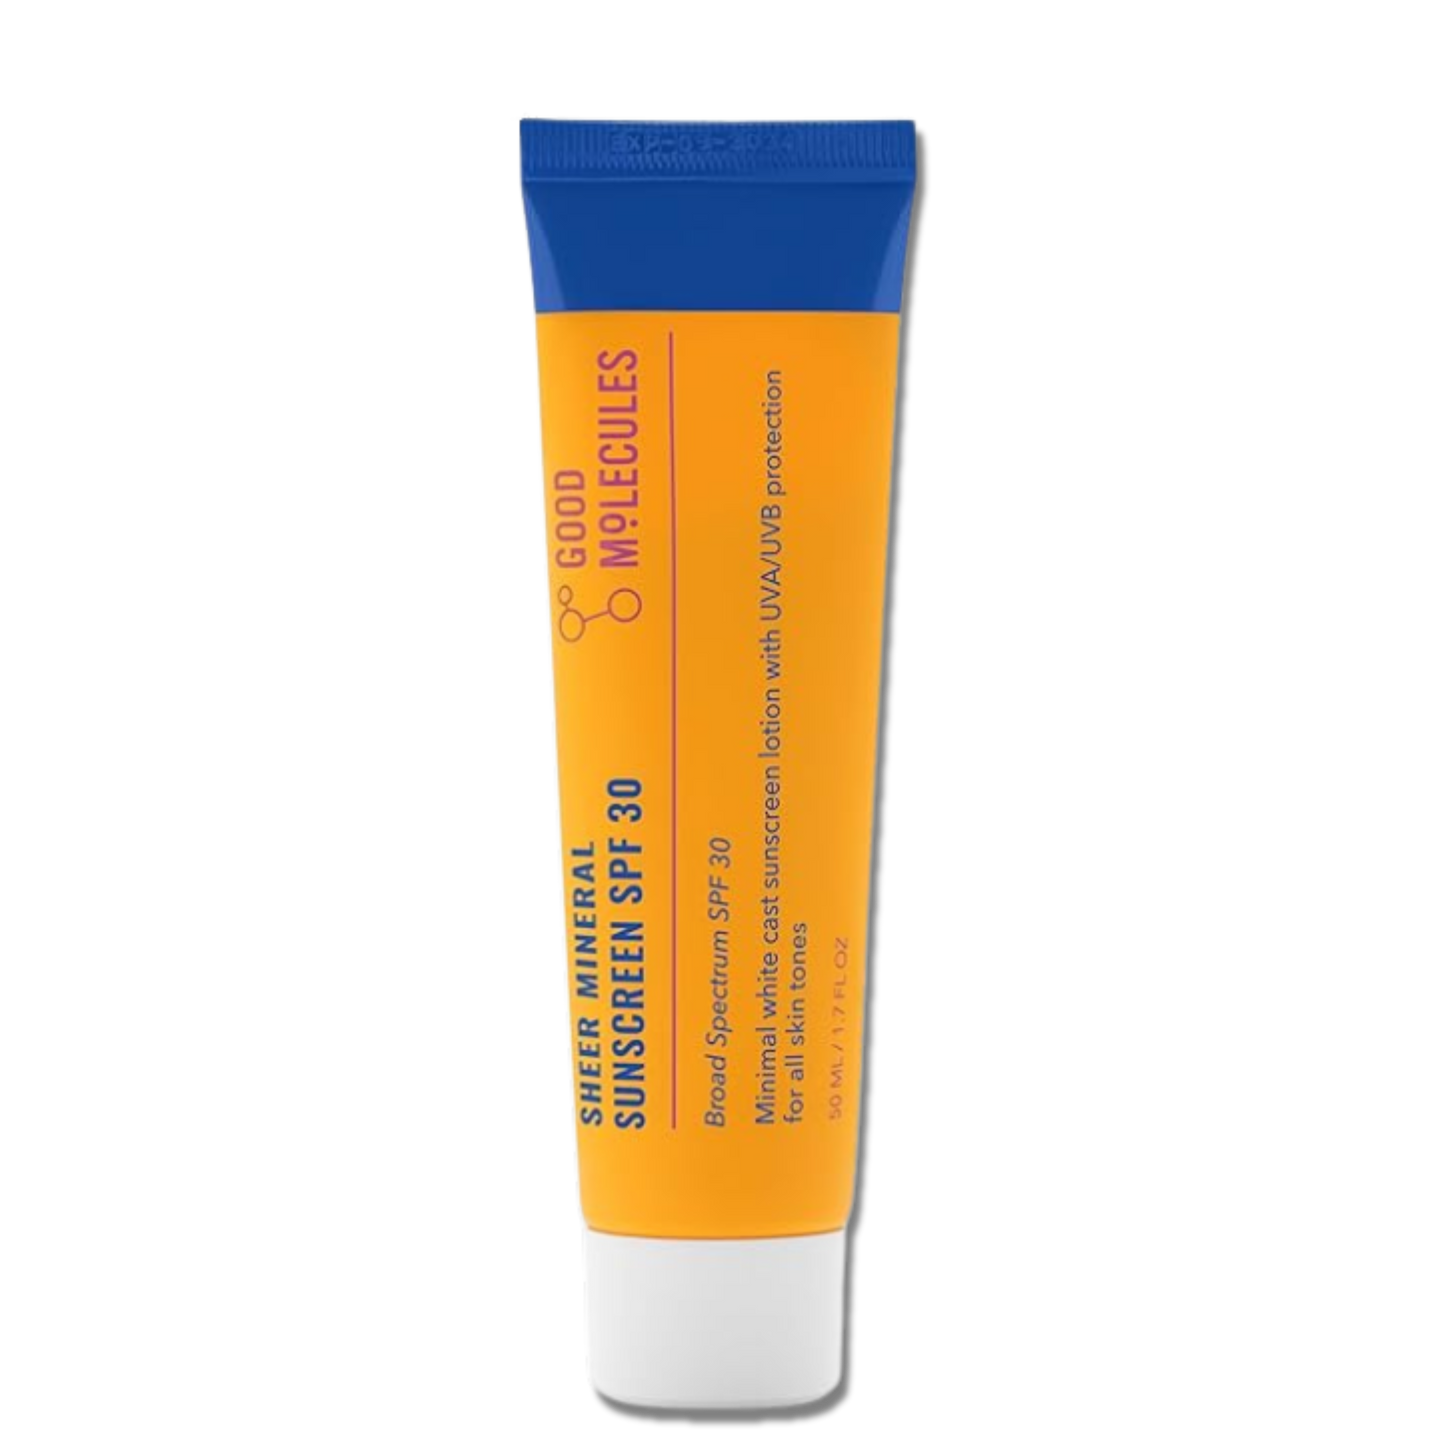 Good Molecules Sheer Mineral Sunscreen SPF 30 50ml Unblemished Bahrain